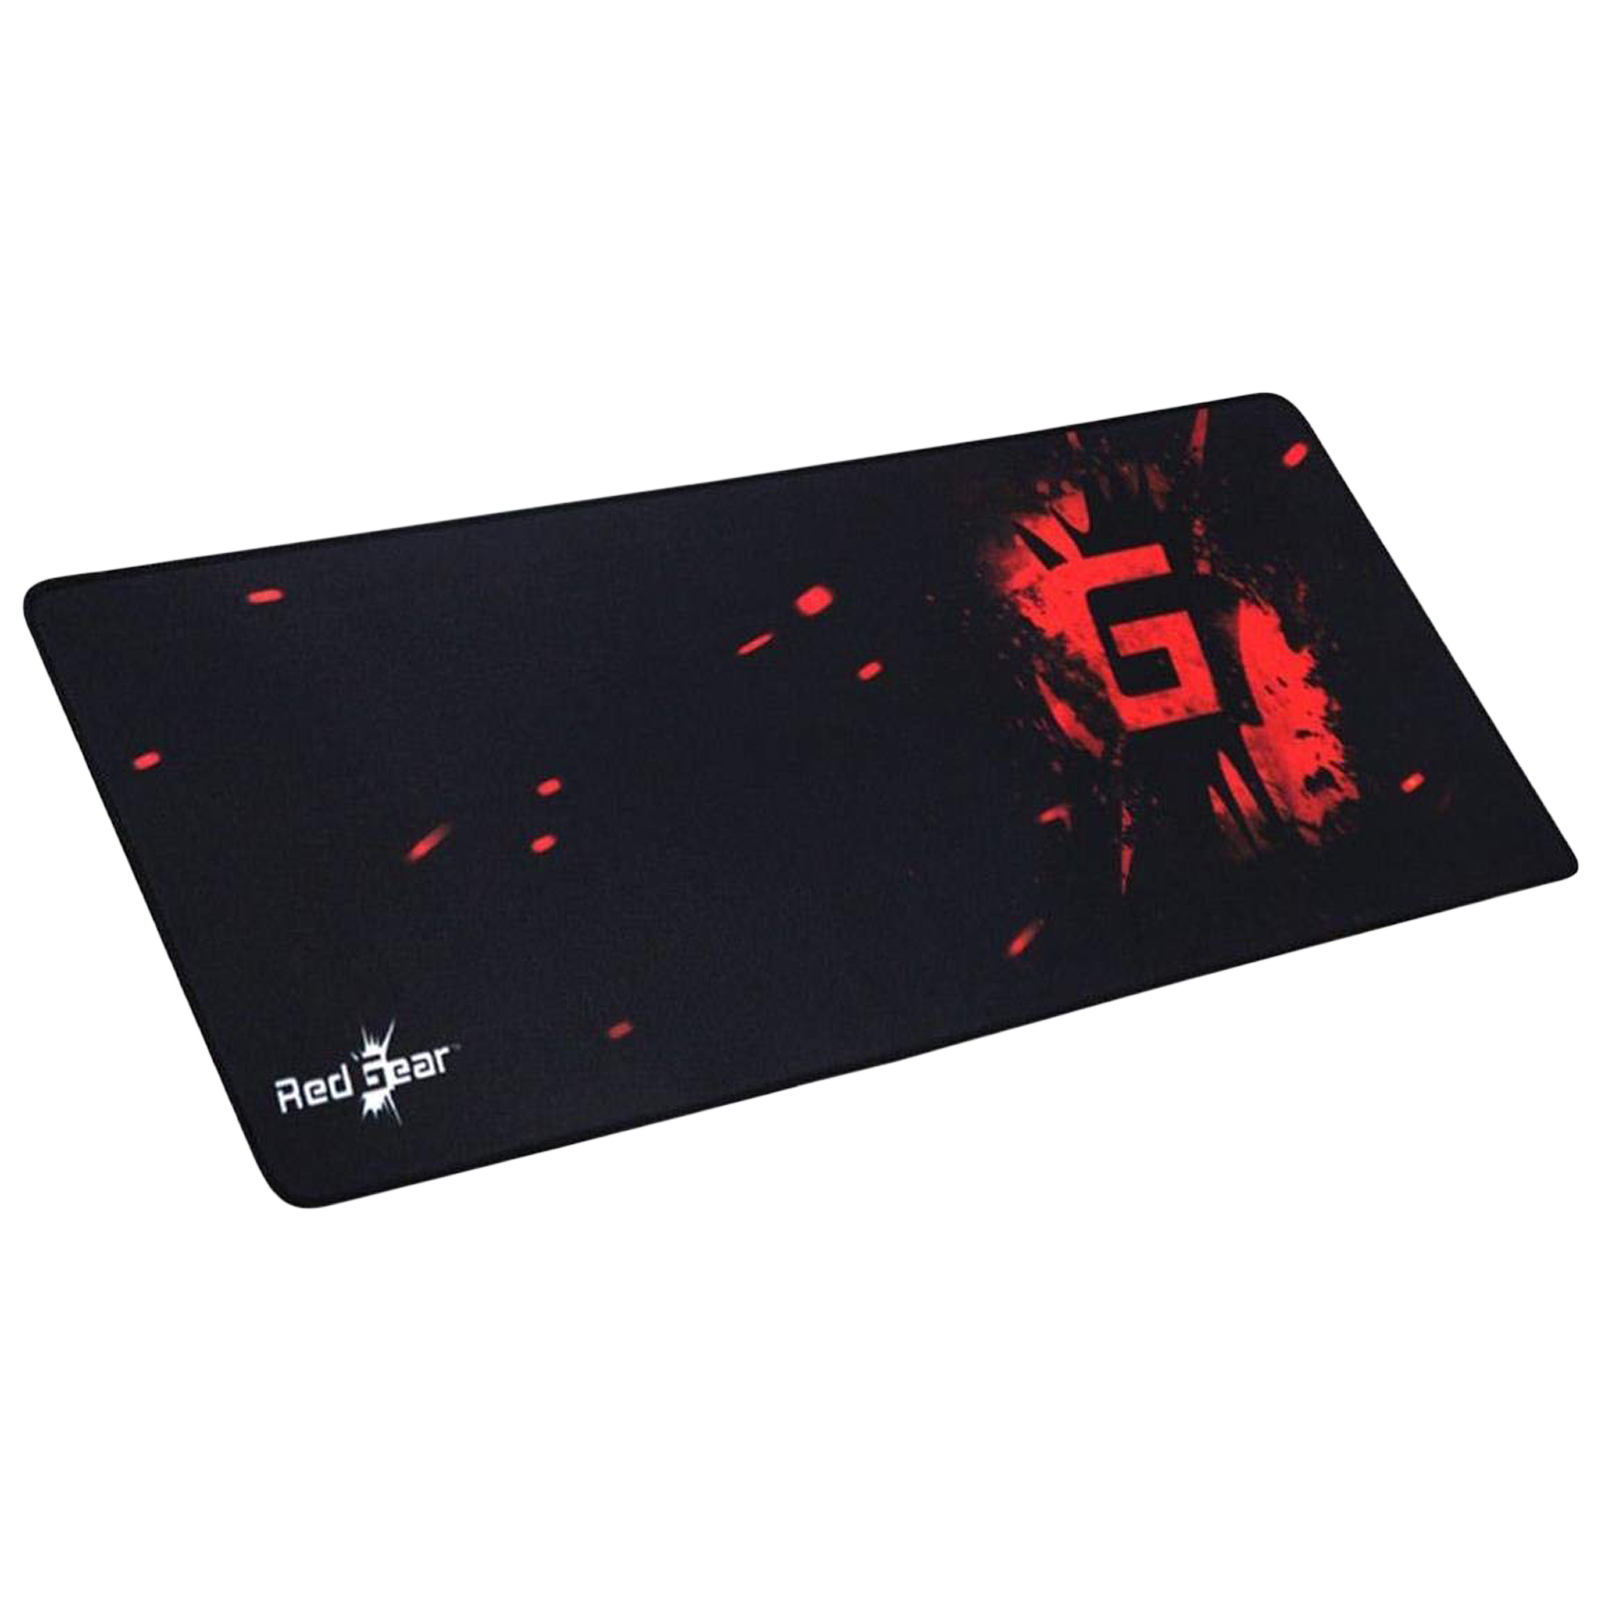 Redgear MP80 Gaming Mouse Pad (Soft And Durable, 8904130838163, Black)